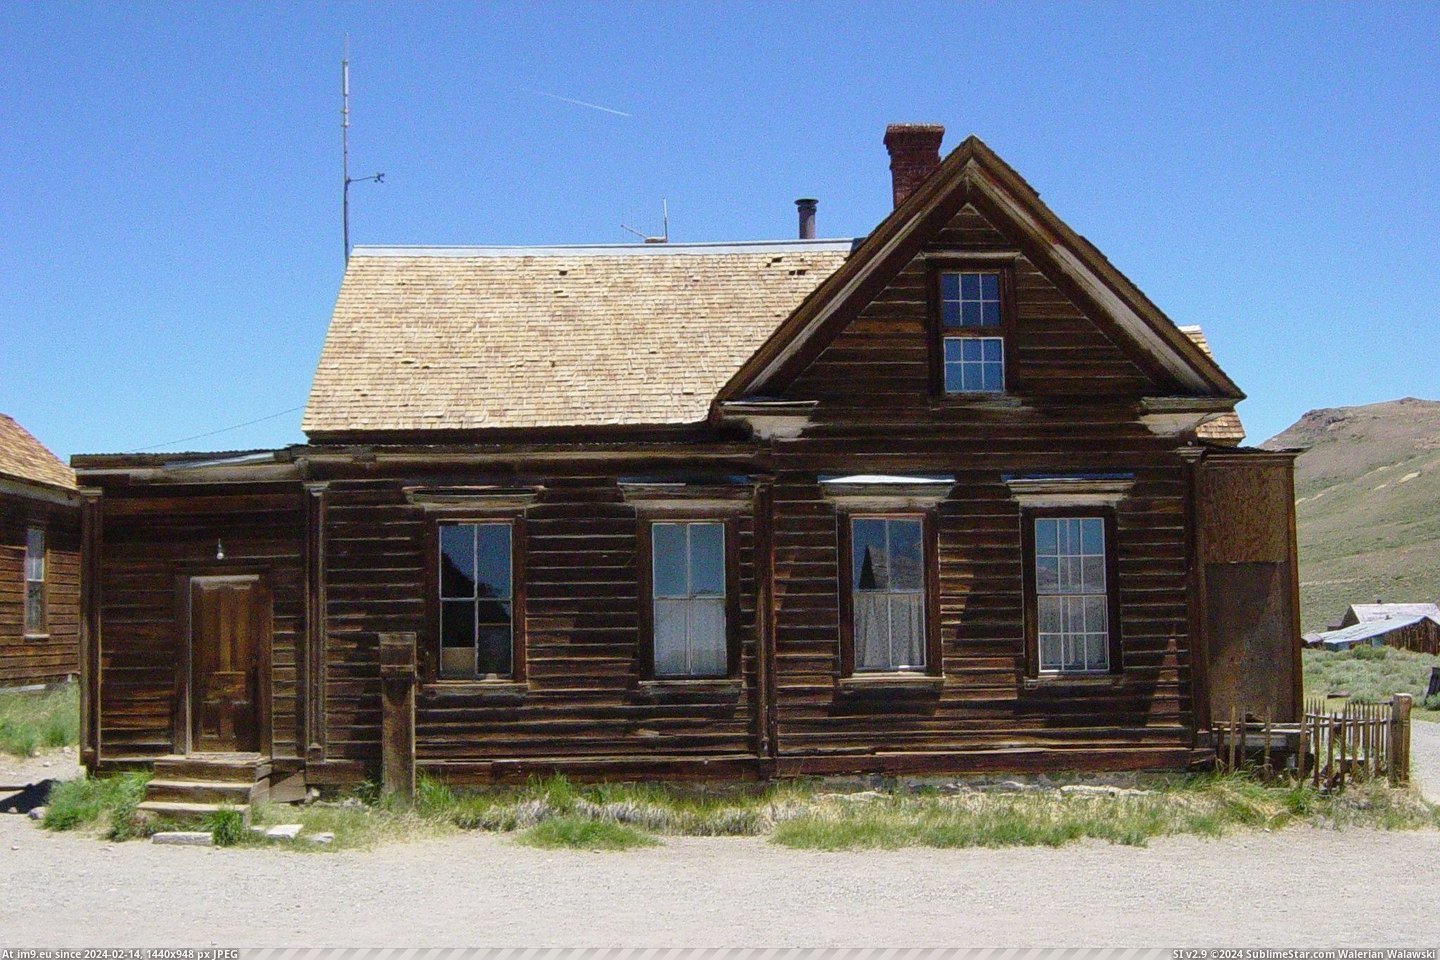 #California #James #Cain #Bodie #Residence James S. Cain Residence In Bodie, California Pic. (Изображение из альбом Bodie - a ghost town in Eastern California))